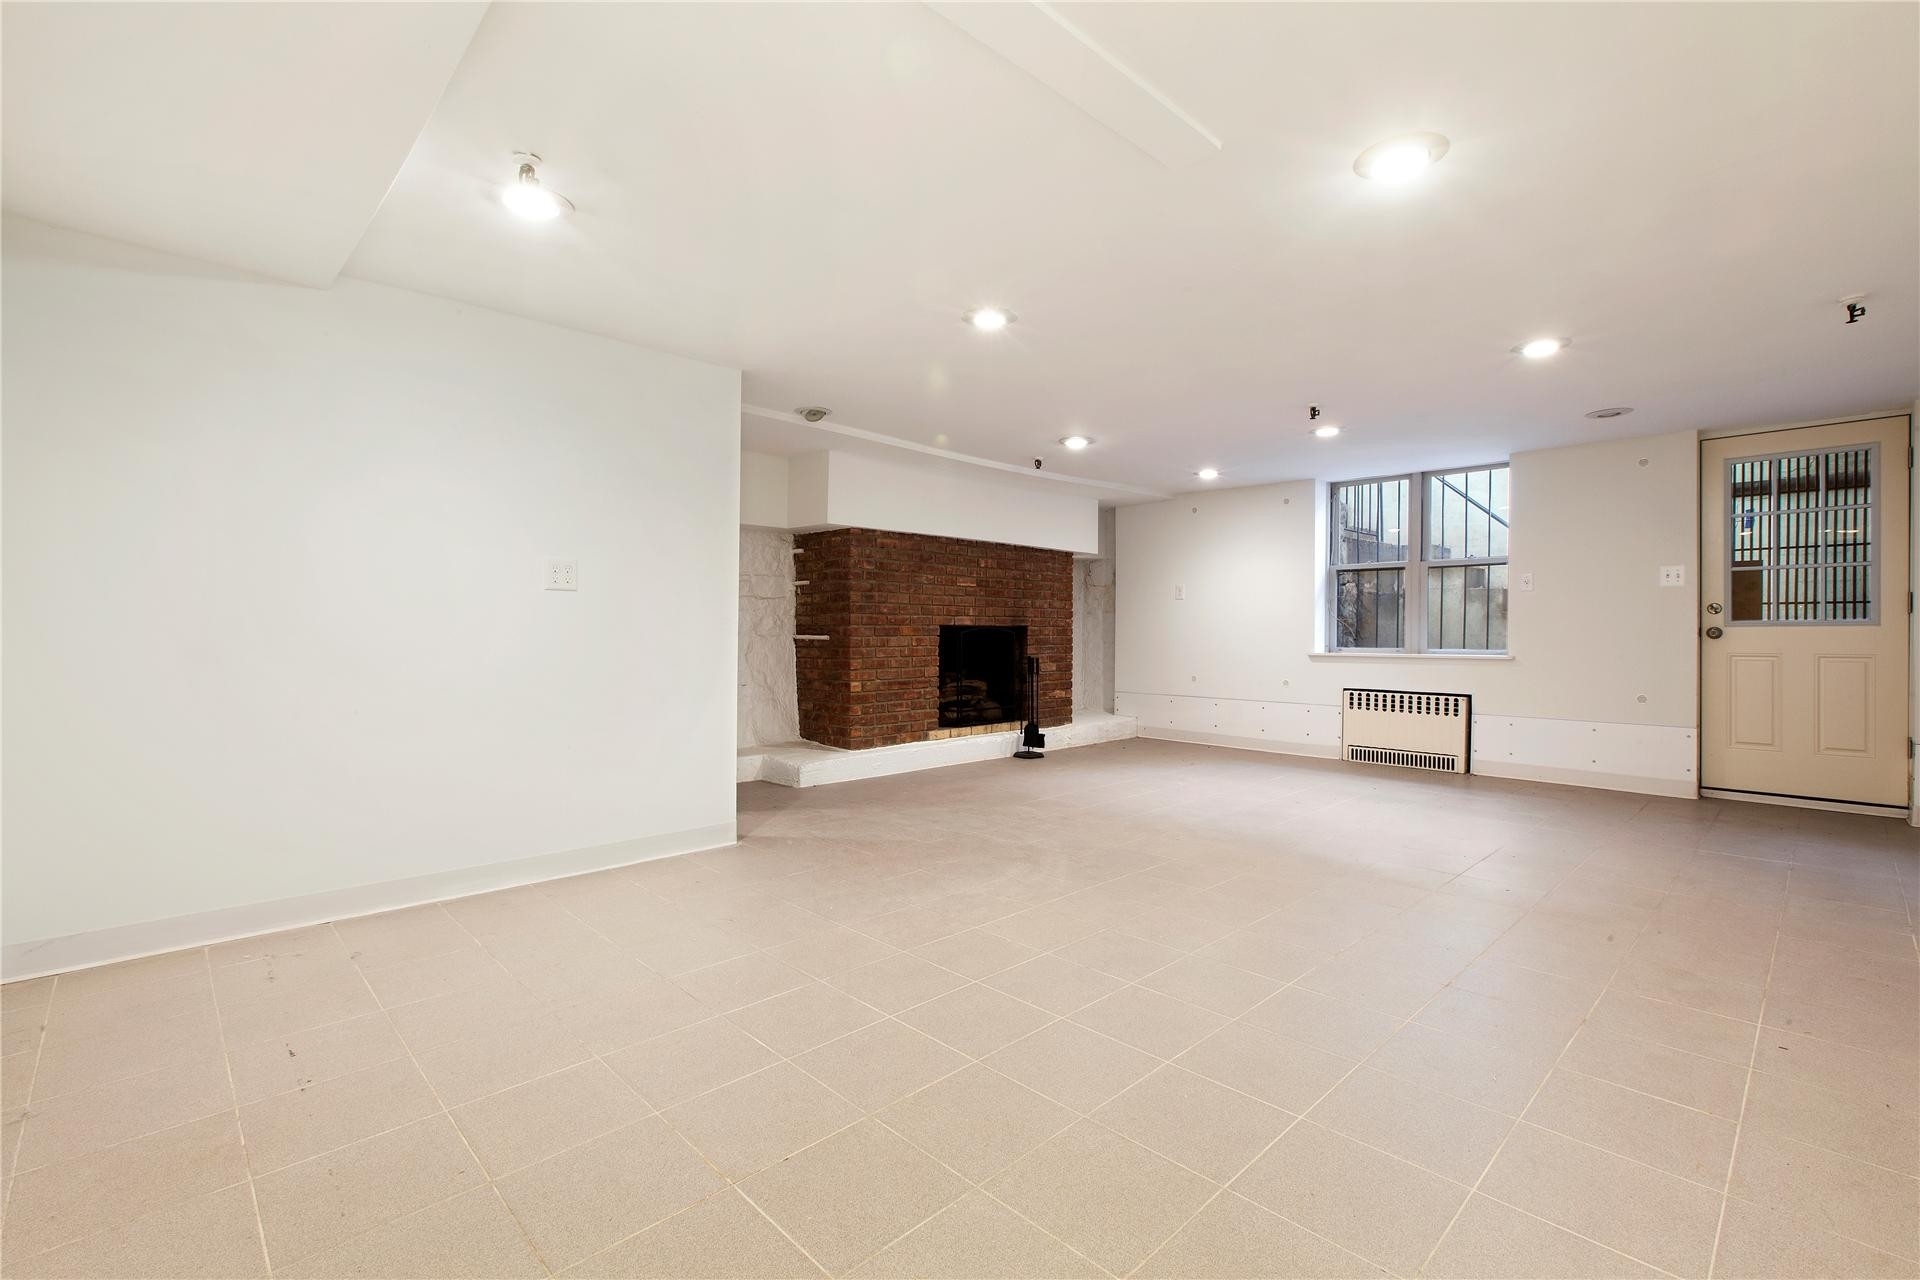 2. Rentals at 458 West 22nd St, 1 New York